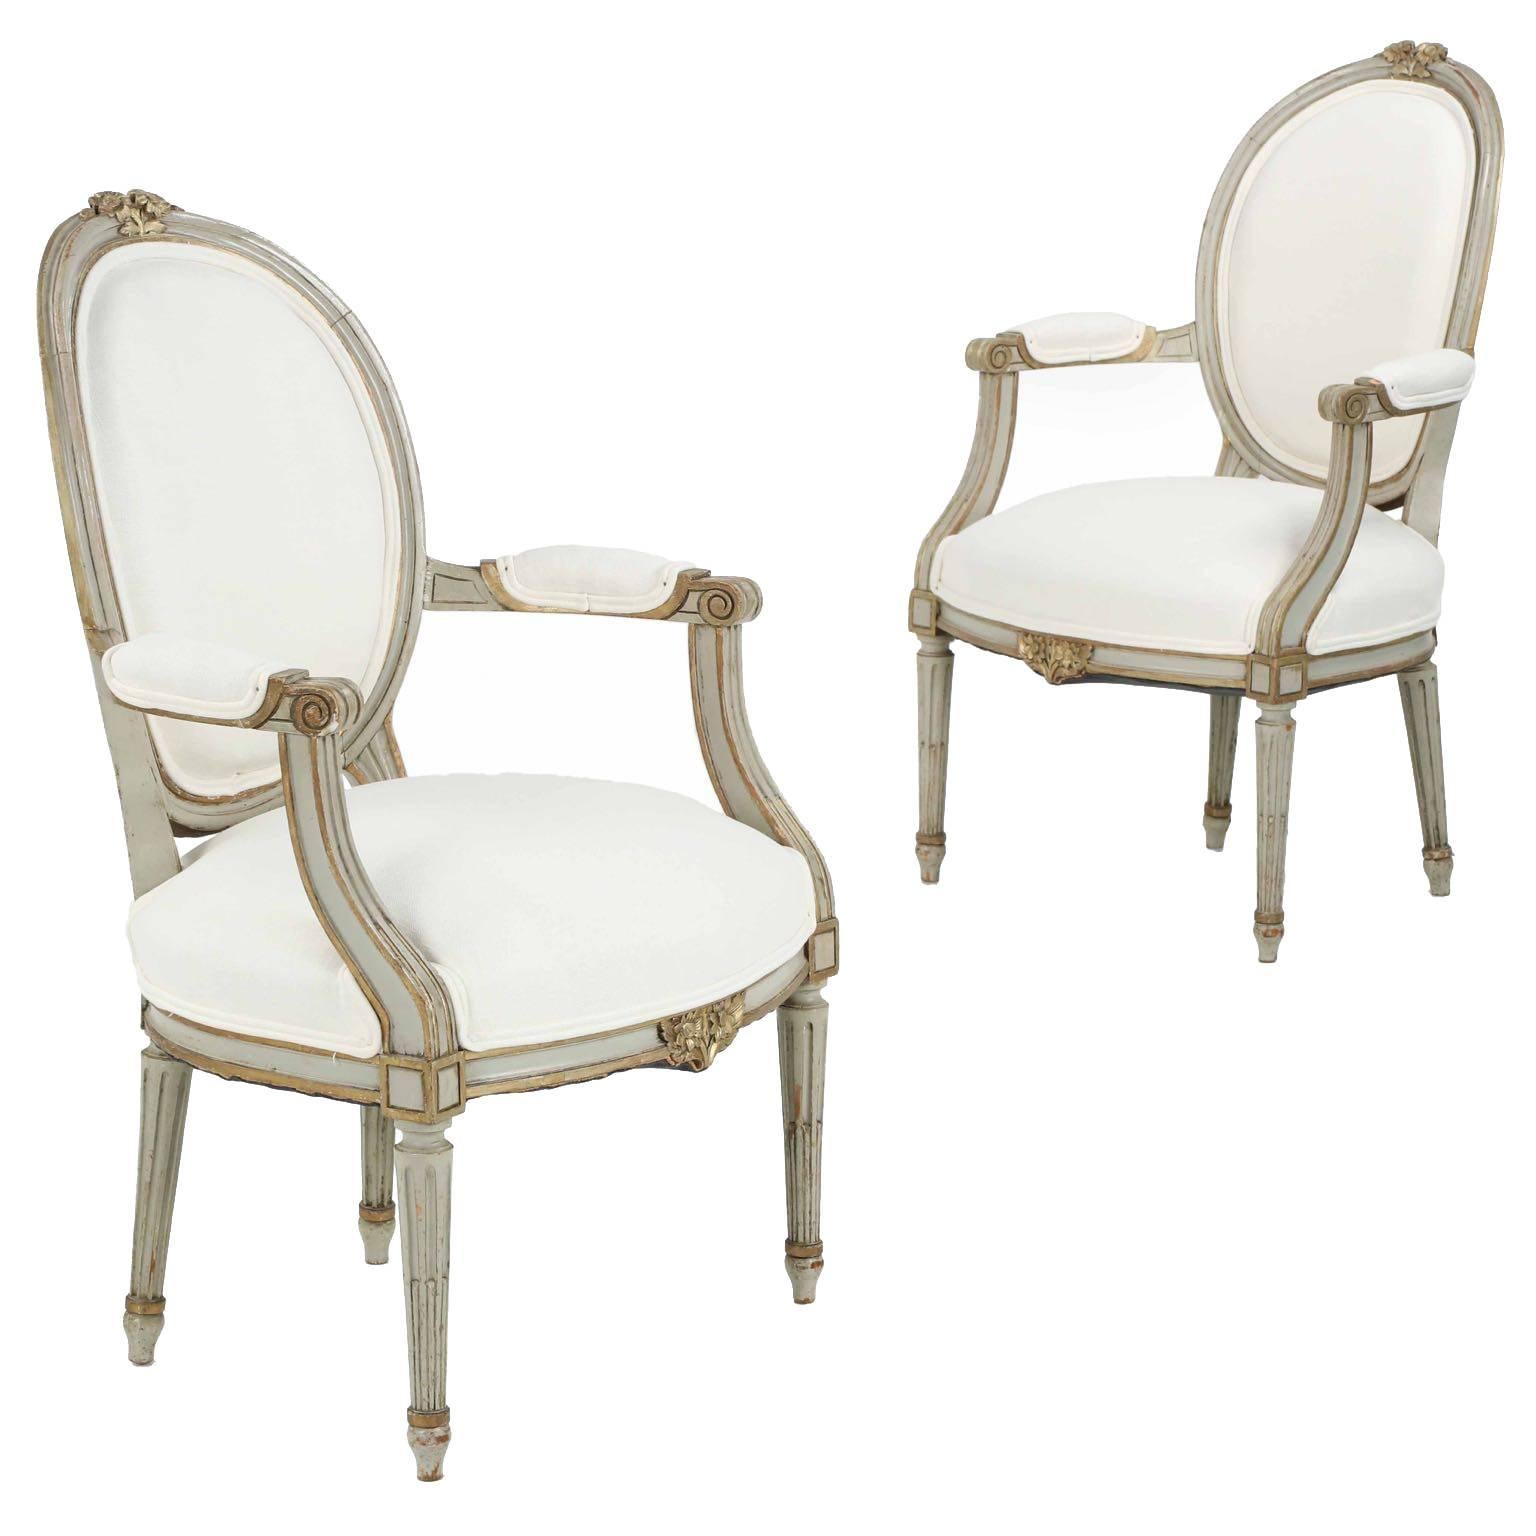 Pair of French Louis XVI Style Painted Antique Fauteuil Armchairs